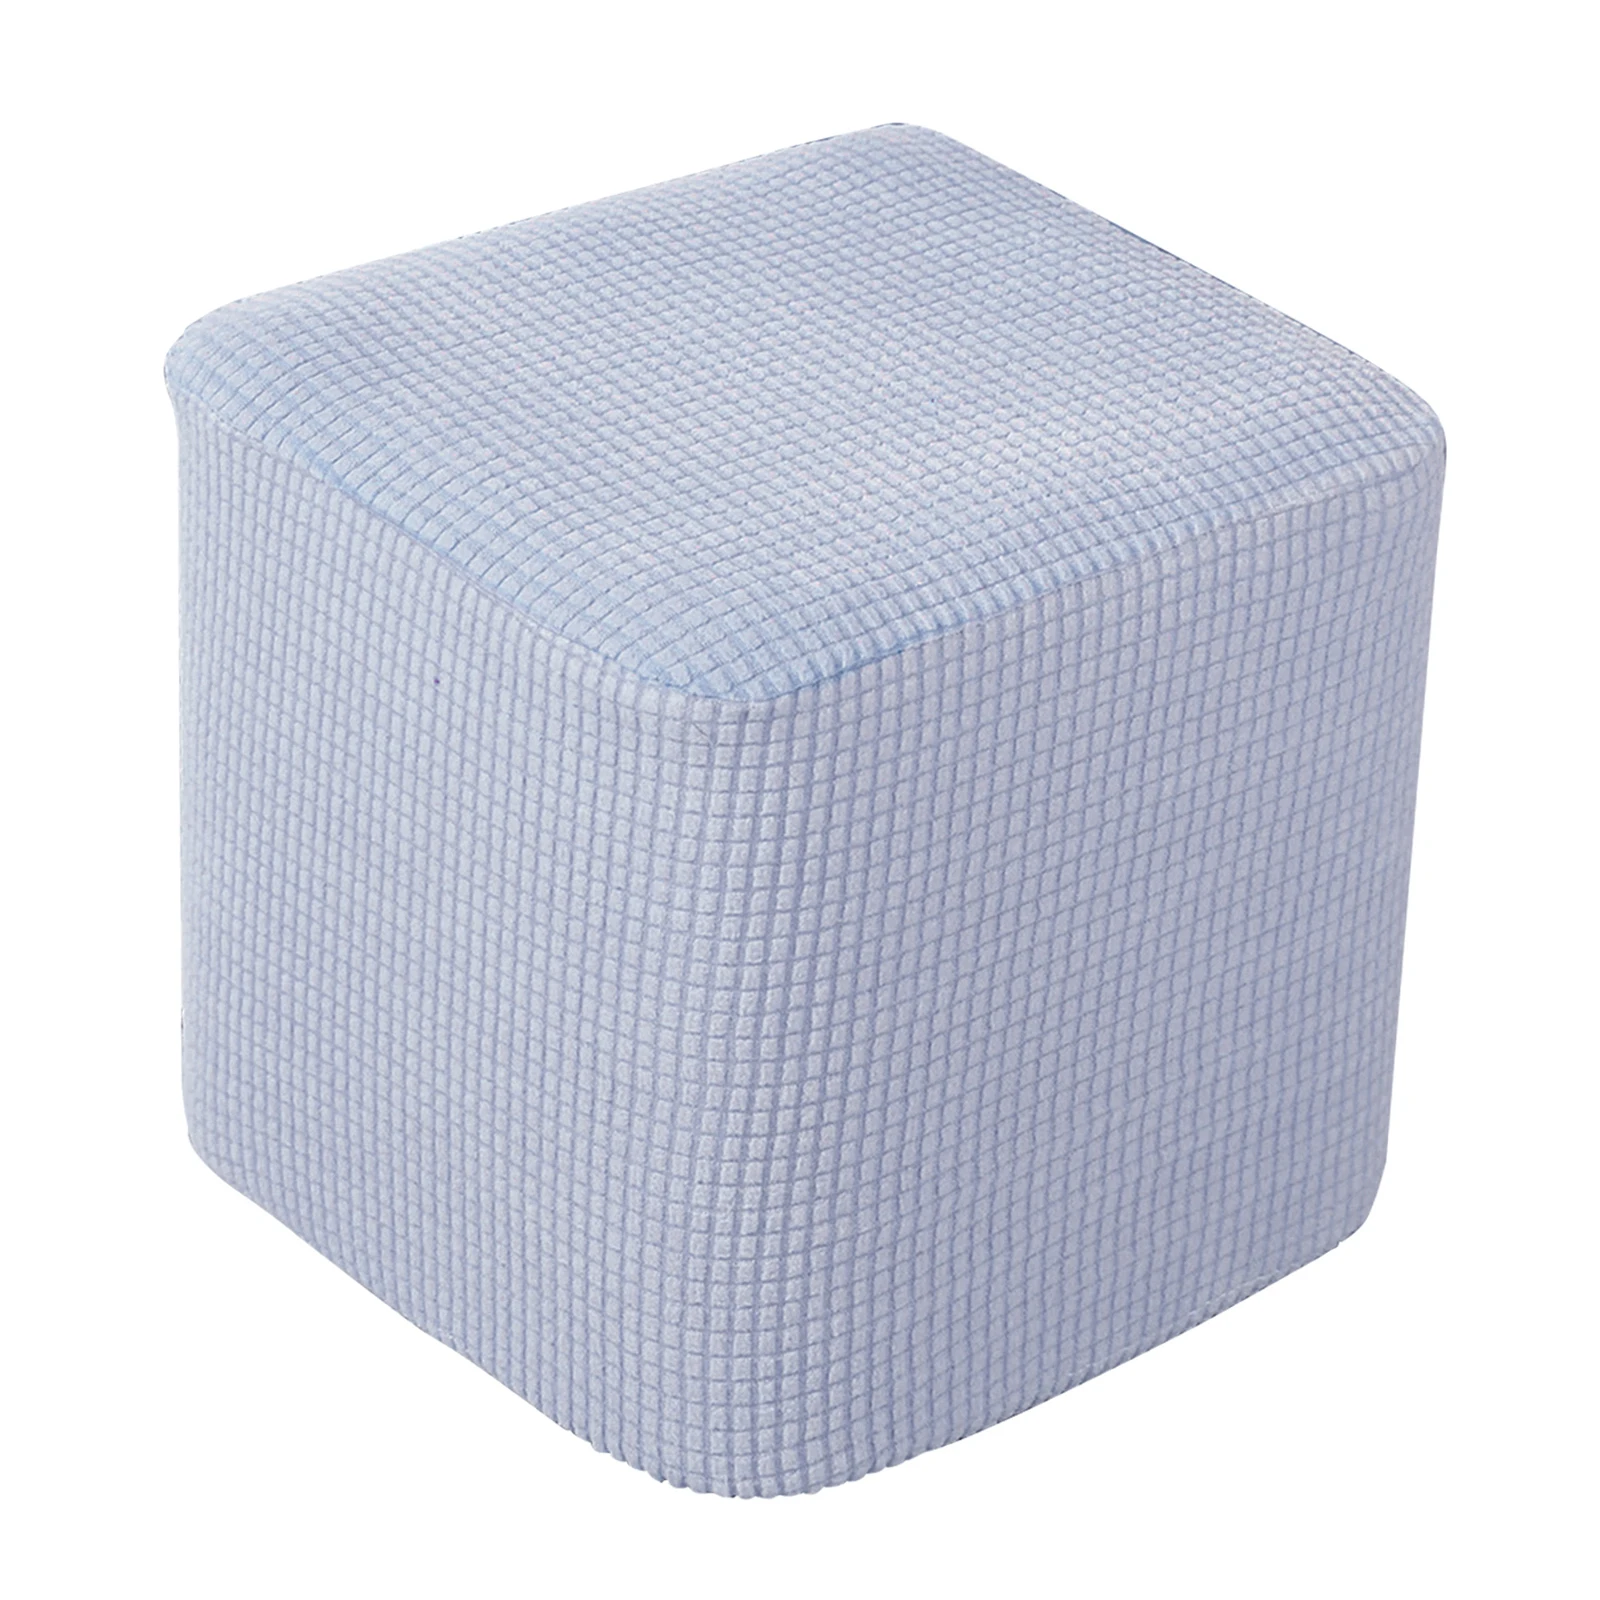 Square Shape Footstool Cover Mini Chair Sofa Slipcover for 10 `-13` Expandable Beanbag Footstool for Living Room Soft Cover